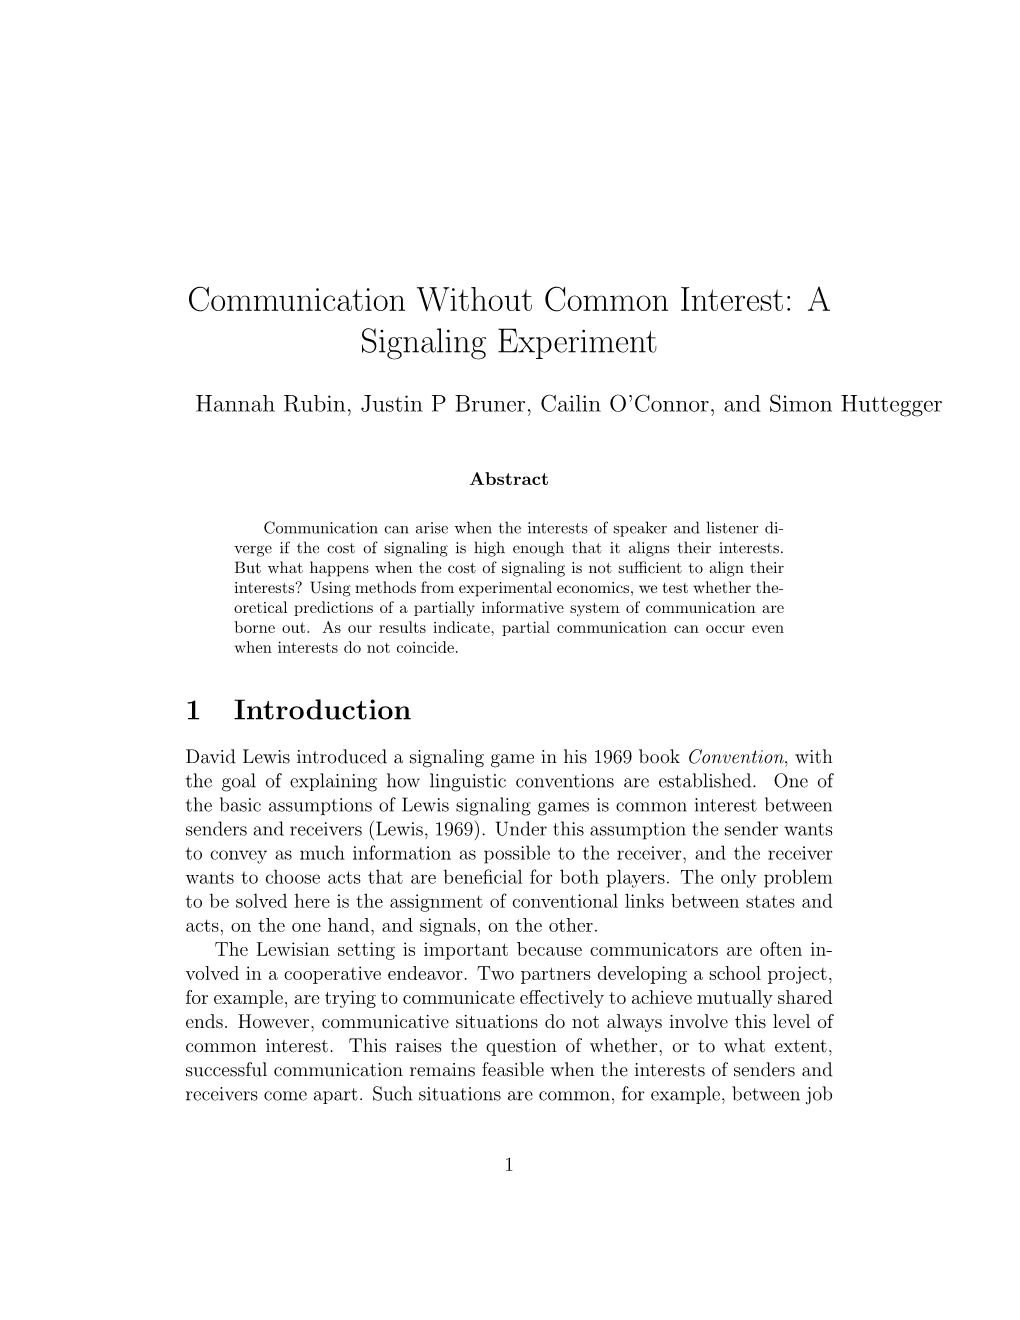 Communication Without Common Interest: a Signaling Experiment